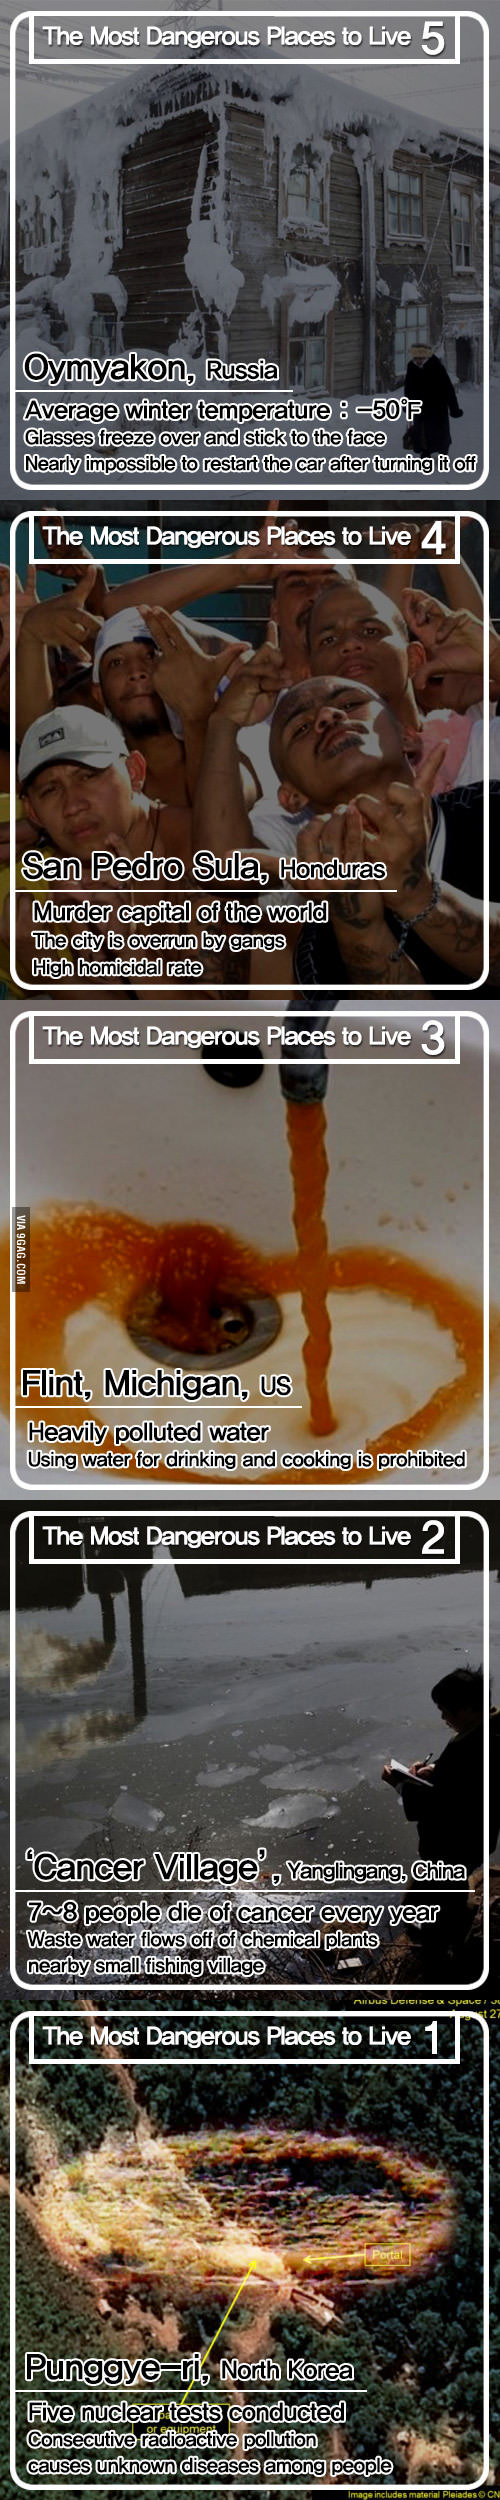 the five most dangerous places to live 